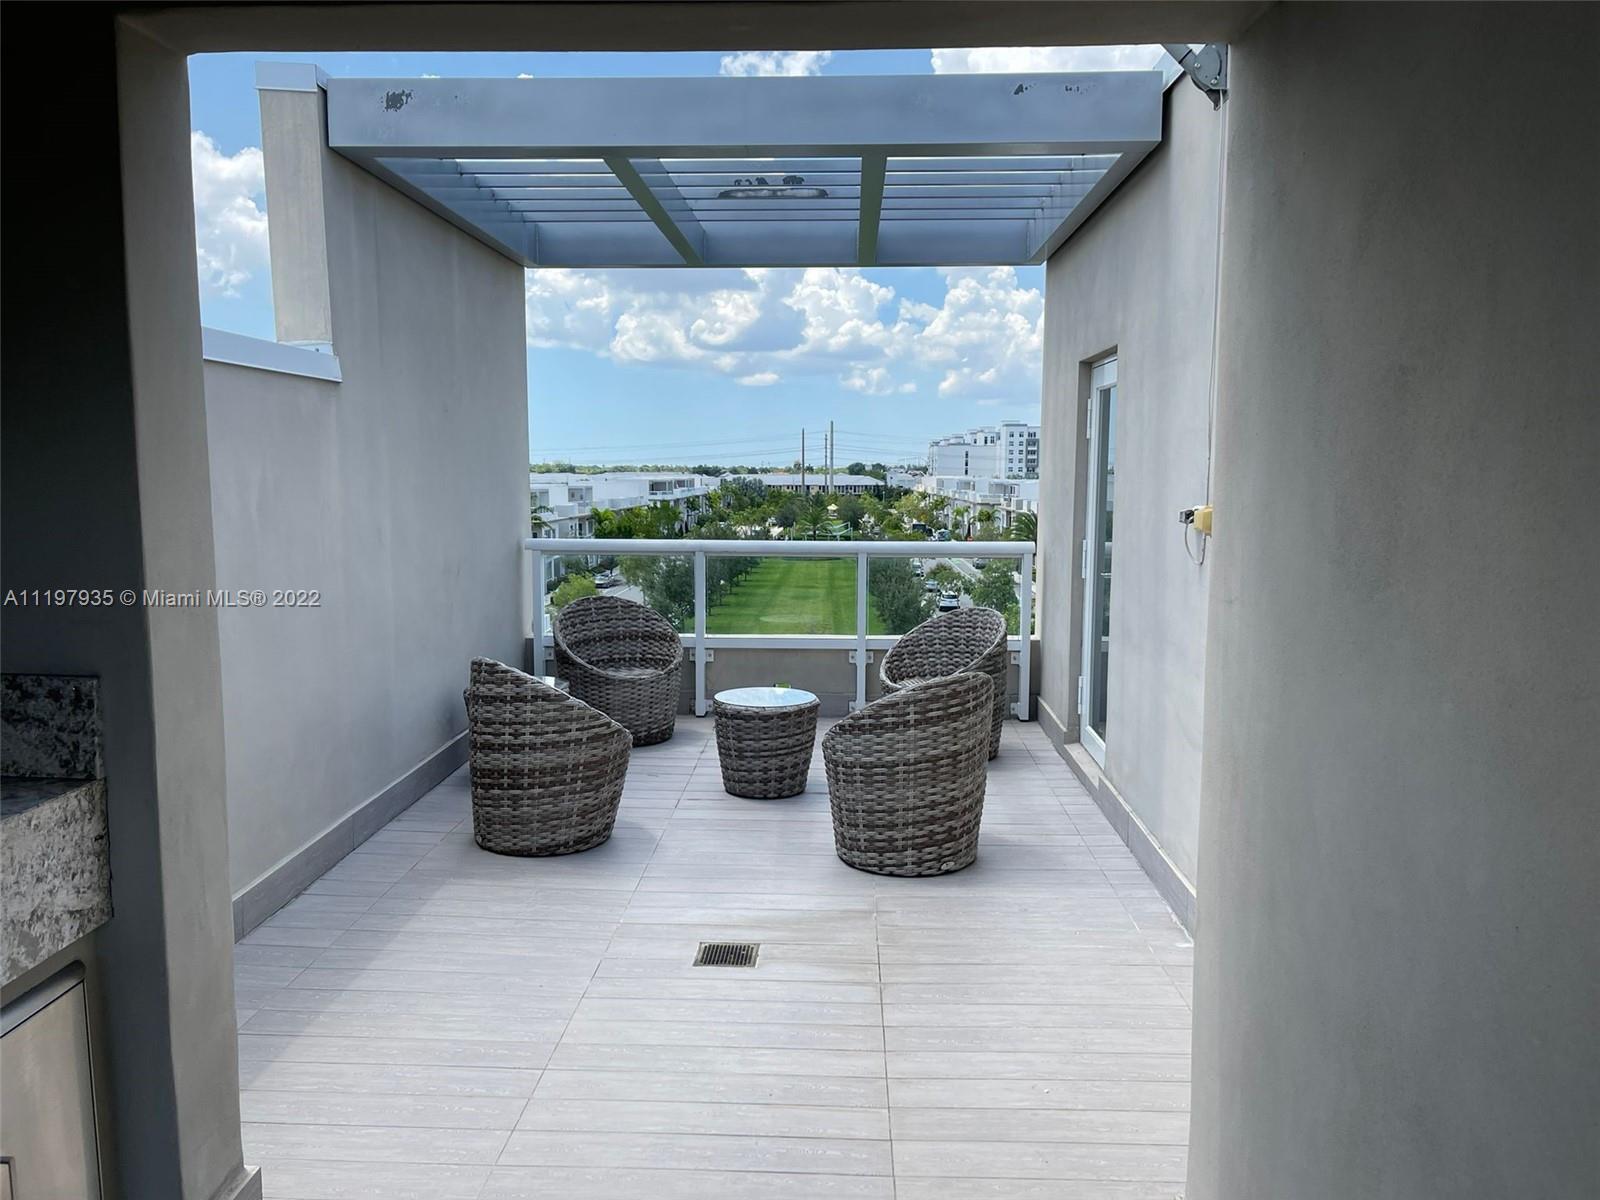 A contemporary townhouse, spacious and well lit at the heart of the city of Doral and located at a very urban community. It has large rooms with modern bathrooms and kitchen with quartz counters, stainless steel equipments and a wine cooler. Garage for two cars.